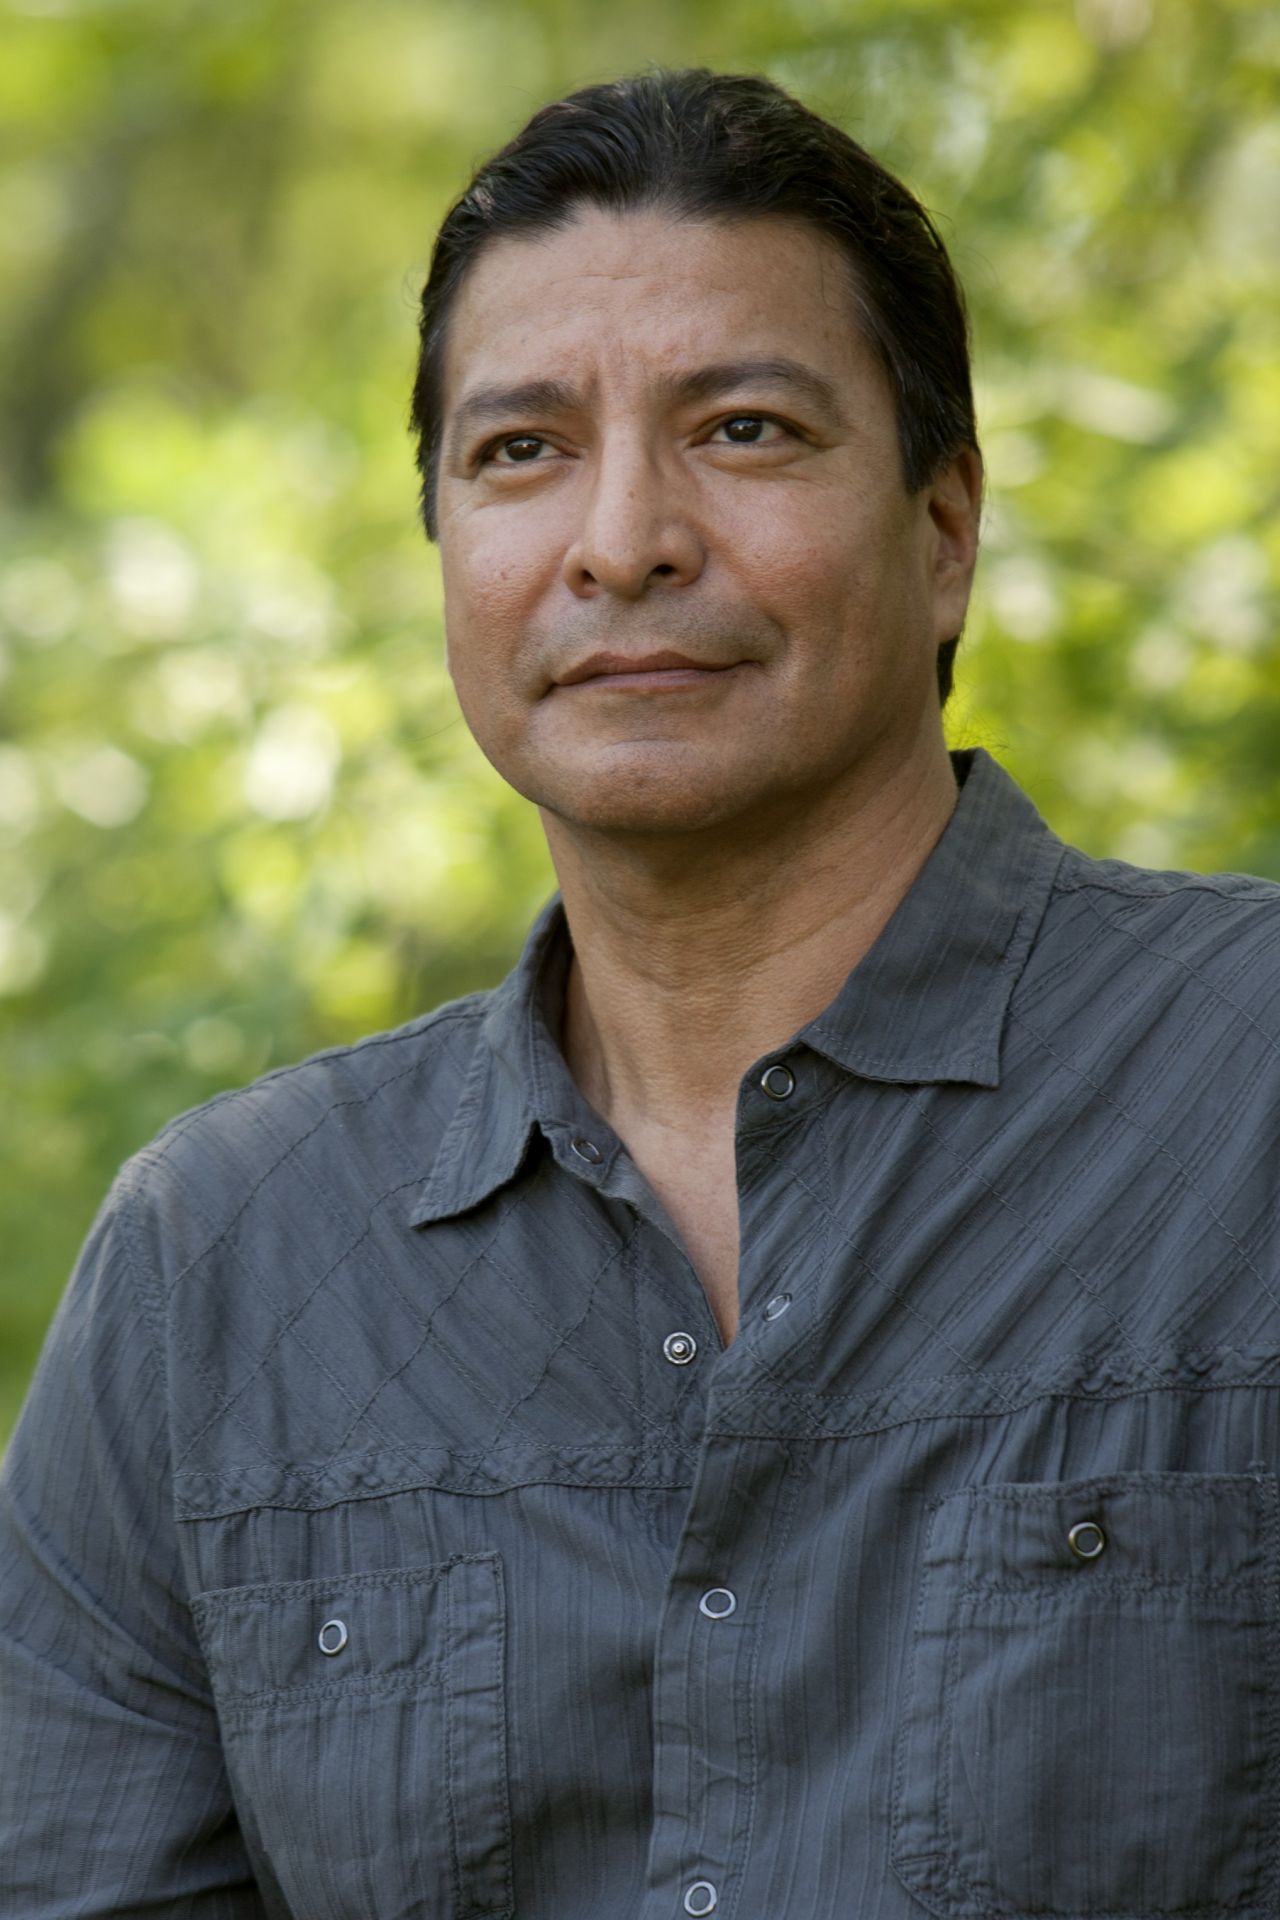 Gil Birmingham stars as Ben Logan in Freestyle Releasing's Crooked Arrows (2012). Photo credit by Kent Eanes.